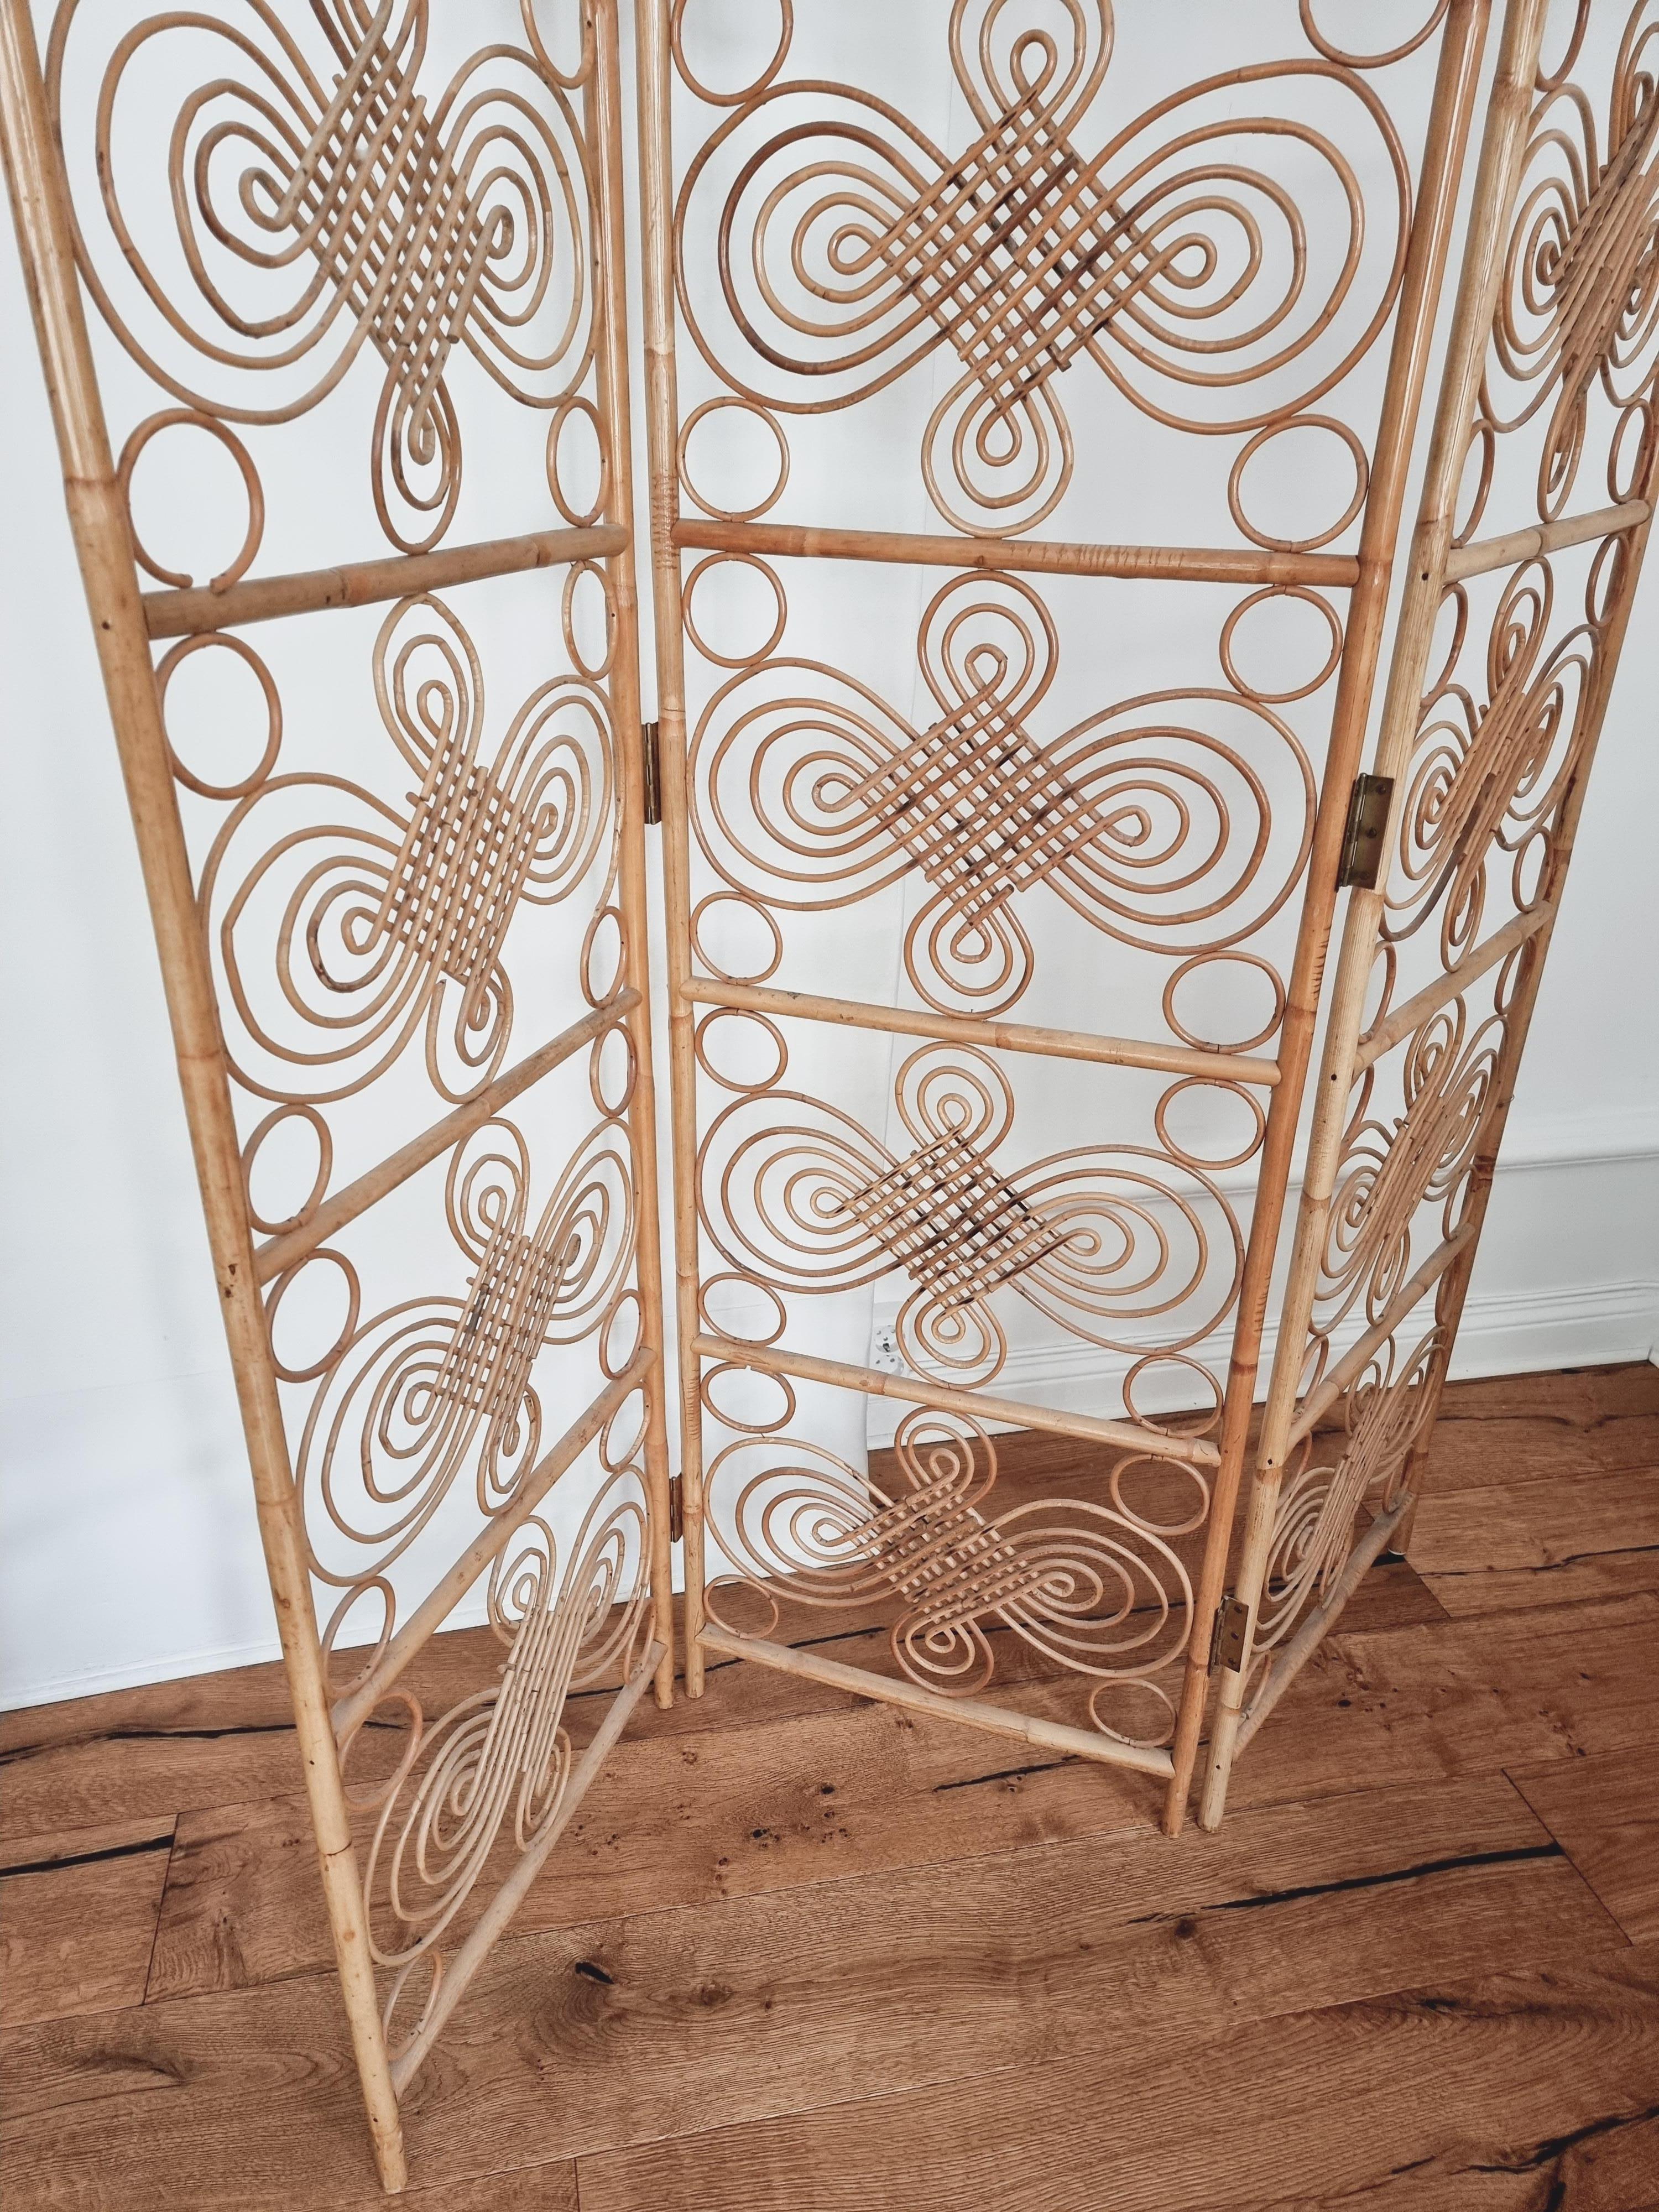 A beautiful rare room divider in rattan, in the style of Larsson Korgmakare (maker of Josef Frank/Firma Svenskt Tenn rattan furniture). 

Decorative and practical, suits most rooms. 

Smaller signs of age and wear. 